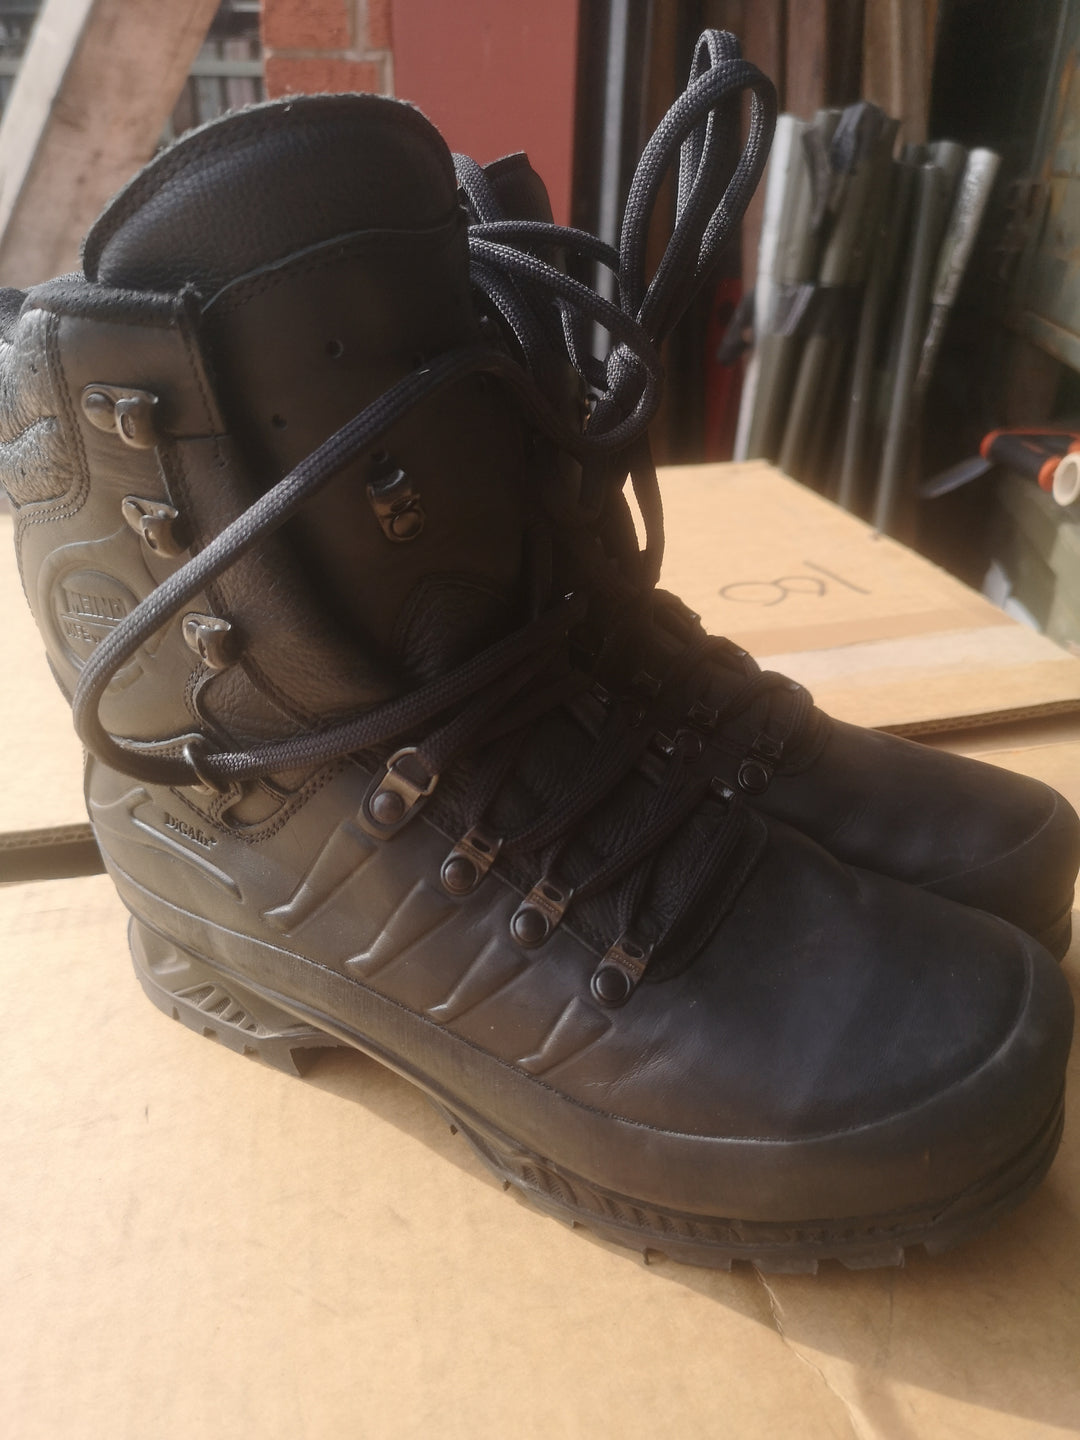 Meindl SF German Army Mountain Boots Grade A+